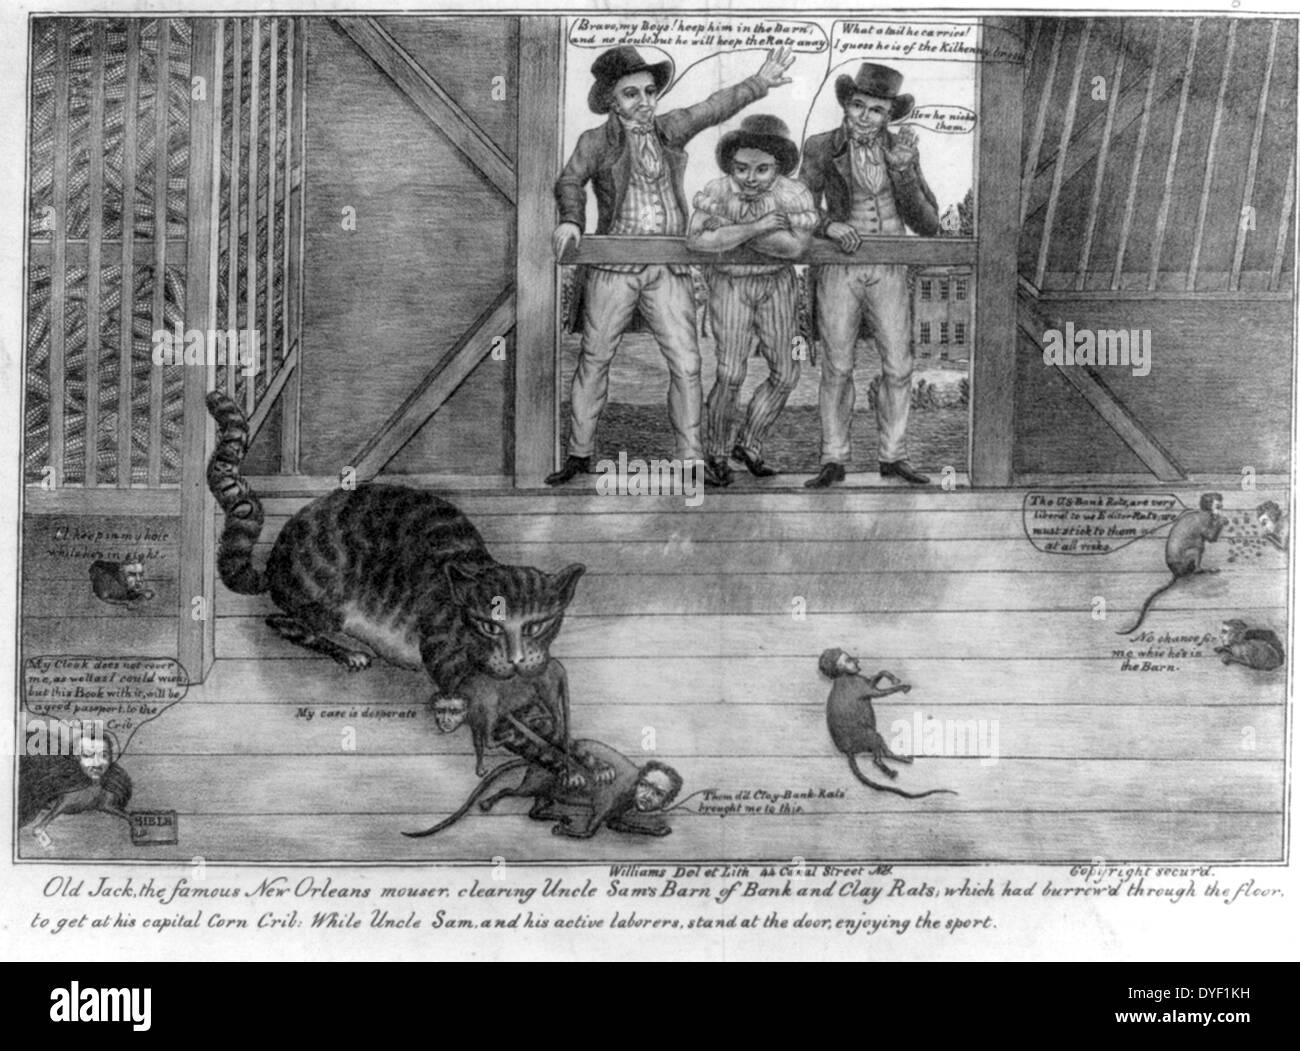 Old Jack, the famous New Orleans mouser, clearing Uncle Sam's barn of bank and Clay rats by Michael Williams, circa 1832. Lithograph print on wove paper. Pro-Jackson political cartoon focusing on his campaign to destroy the political power and influence of the Bank of the United States. Henry Clay and his compatriots are shown as rats trying to get at the corn. Stock Photo